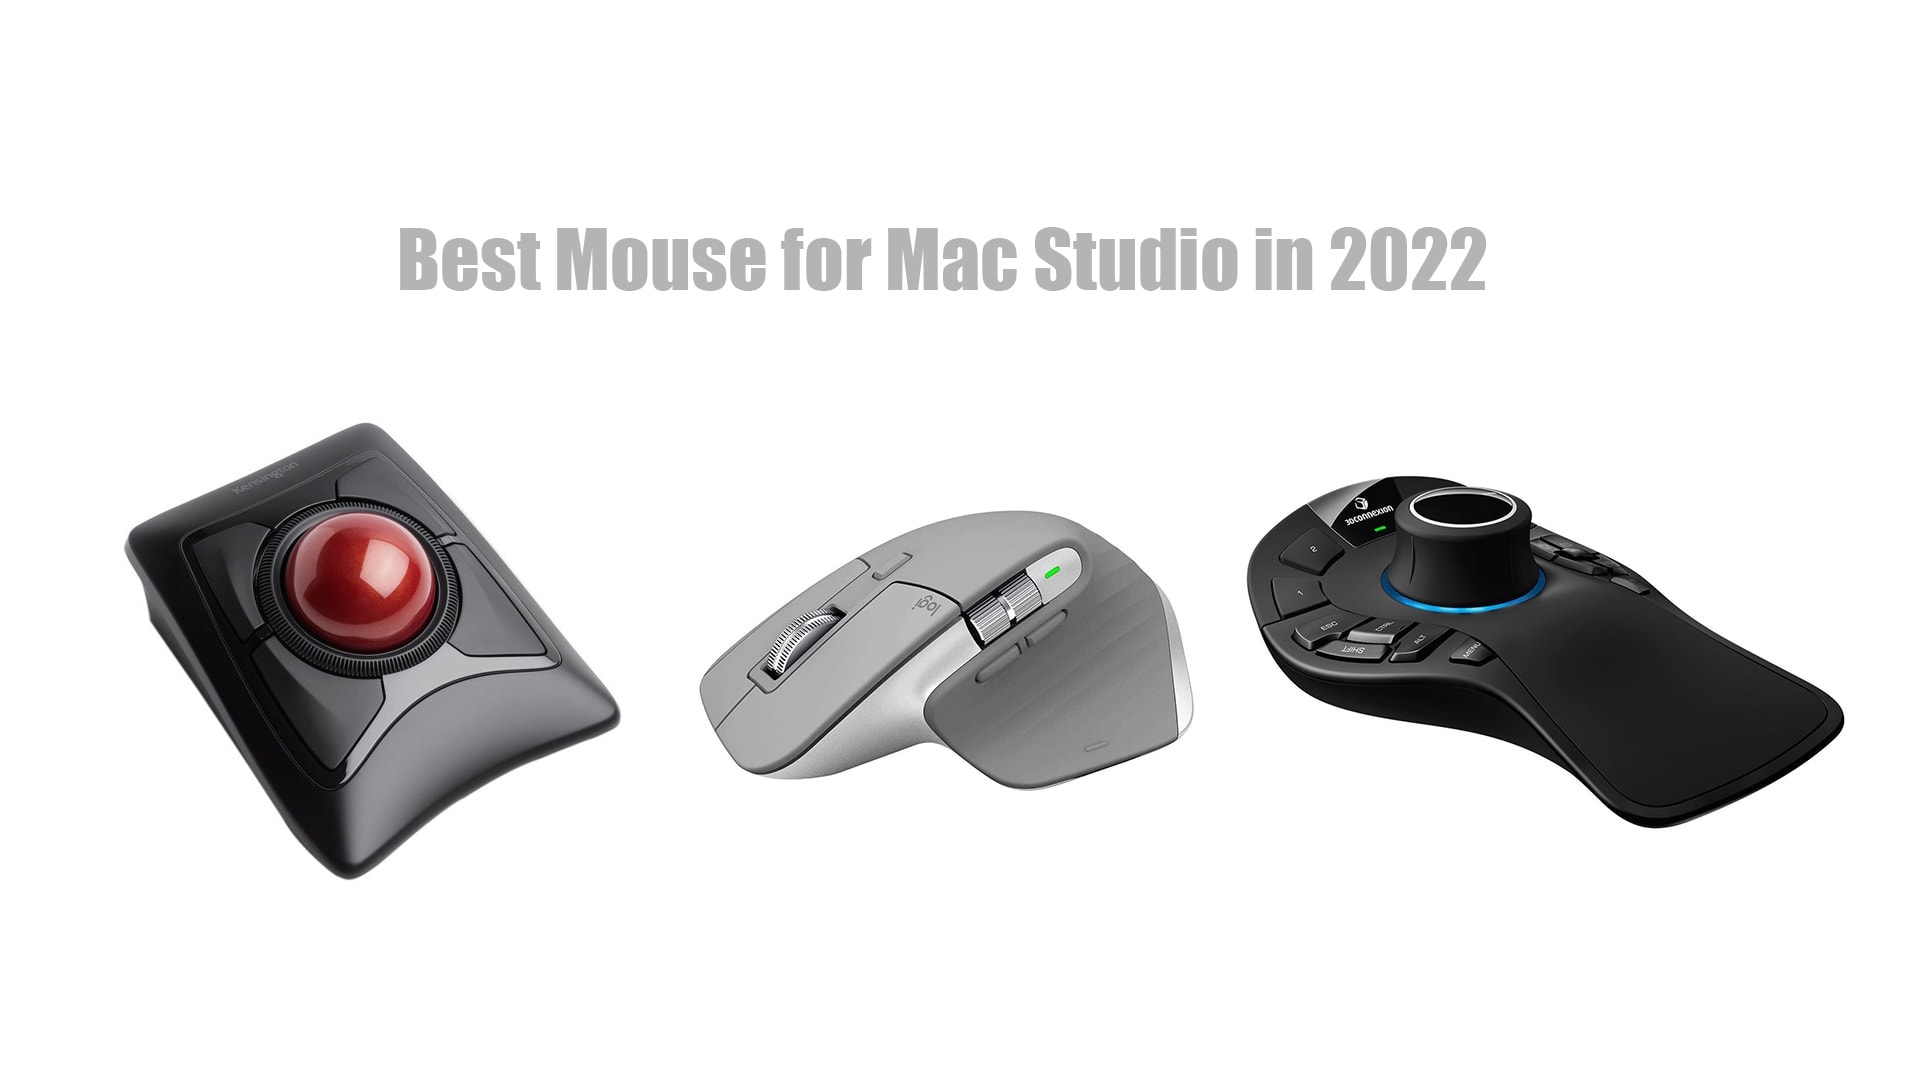 Best Mouse for Mac Studio in 2022